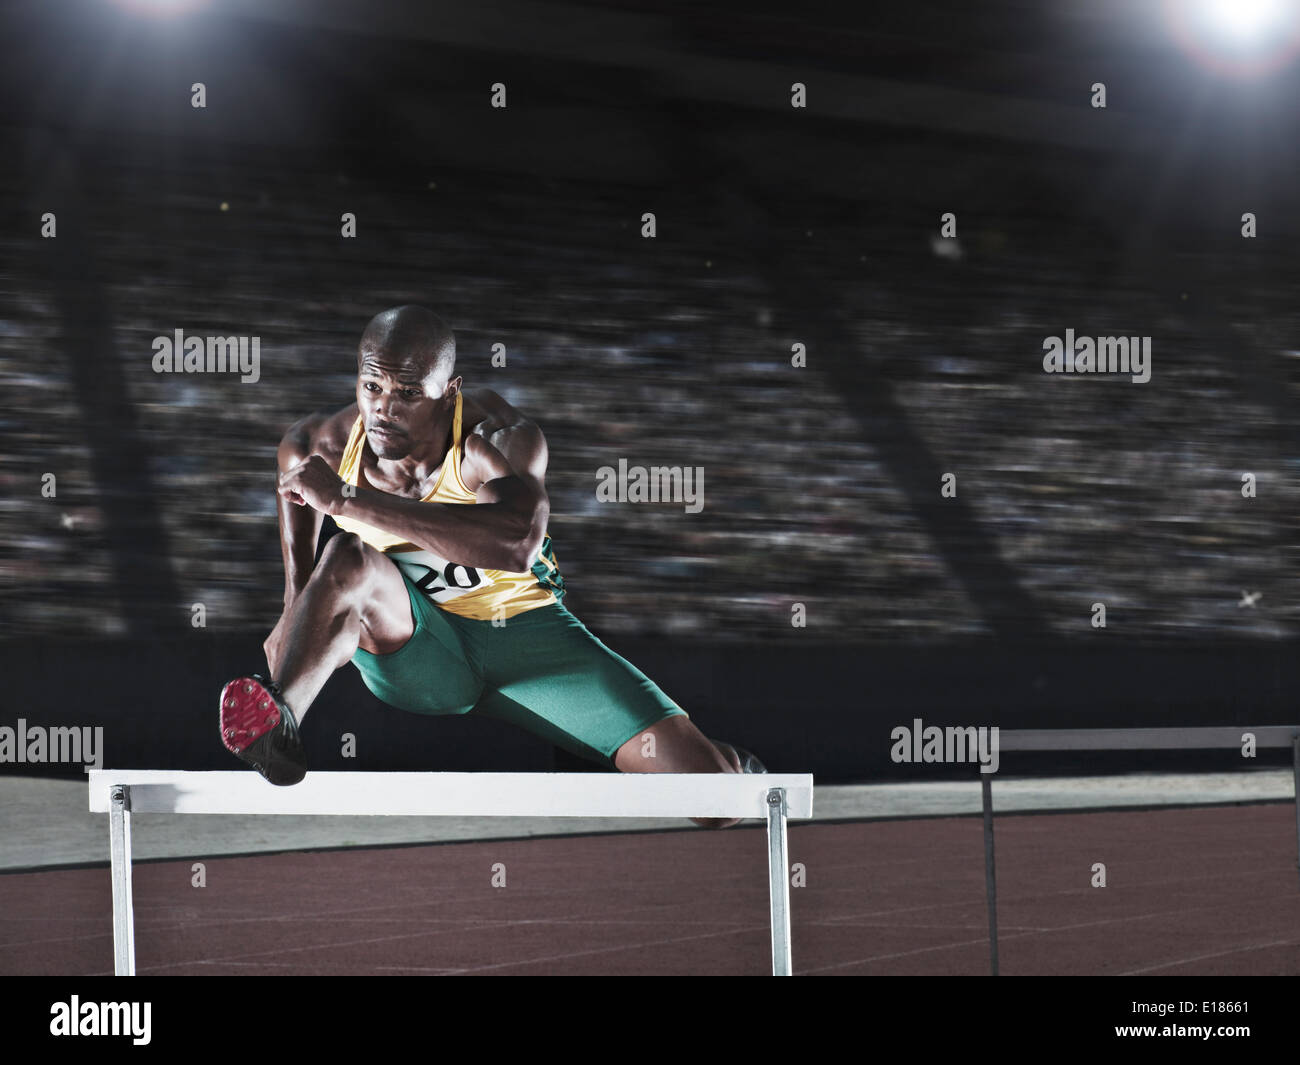 Runner jumping hurdle on track Stock Photo